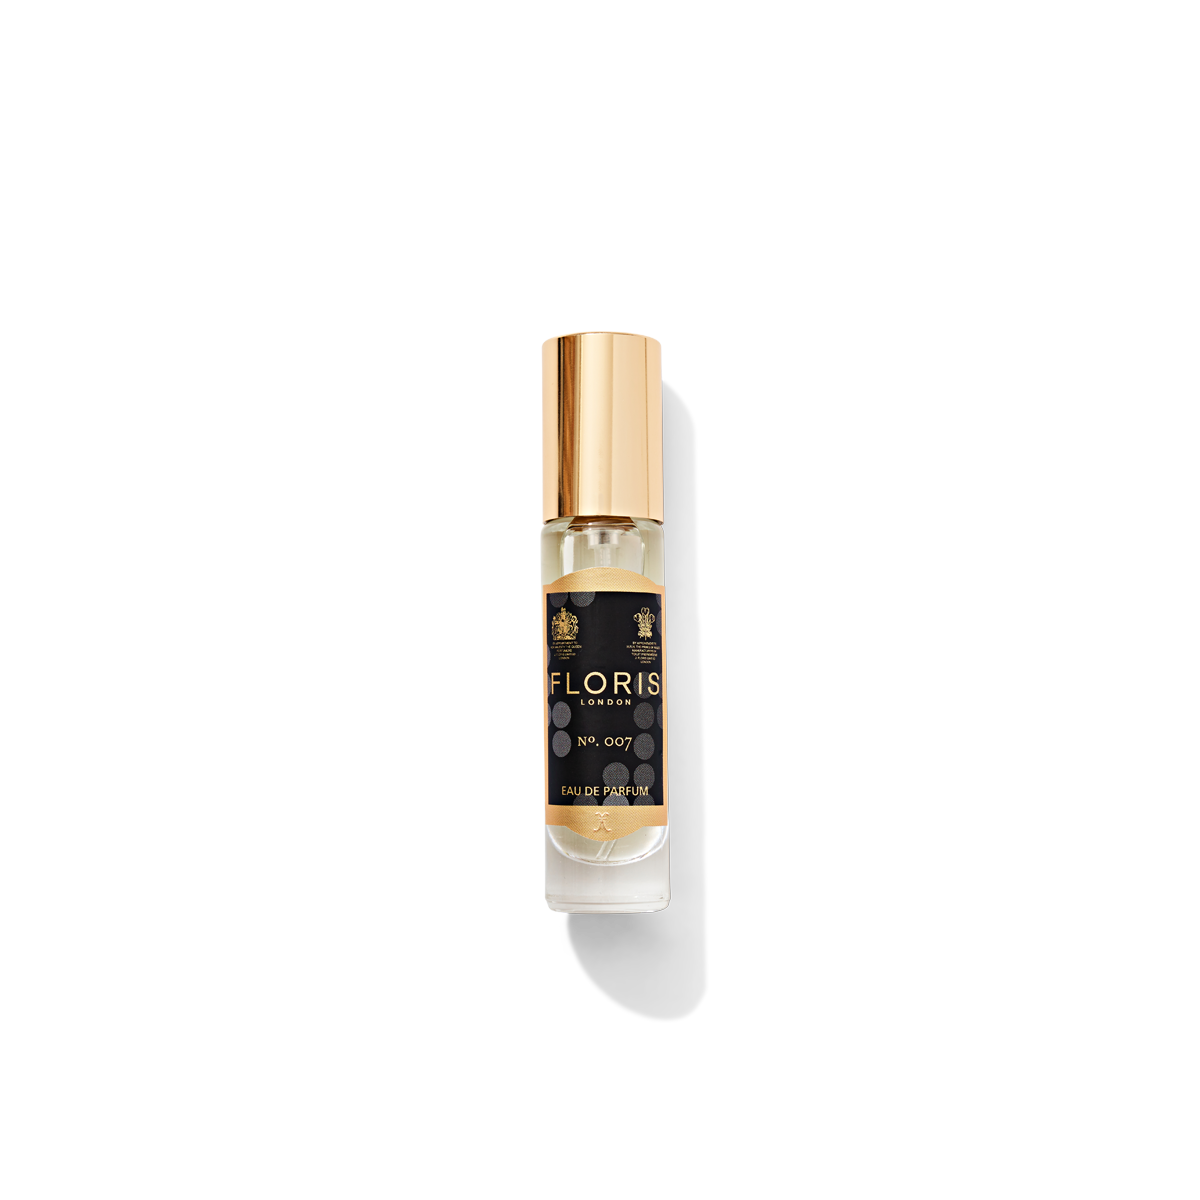 Small 10ml gold atomiser with black label